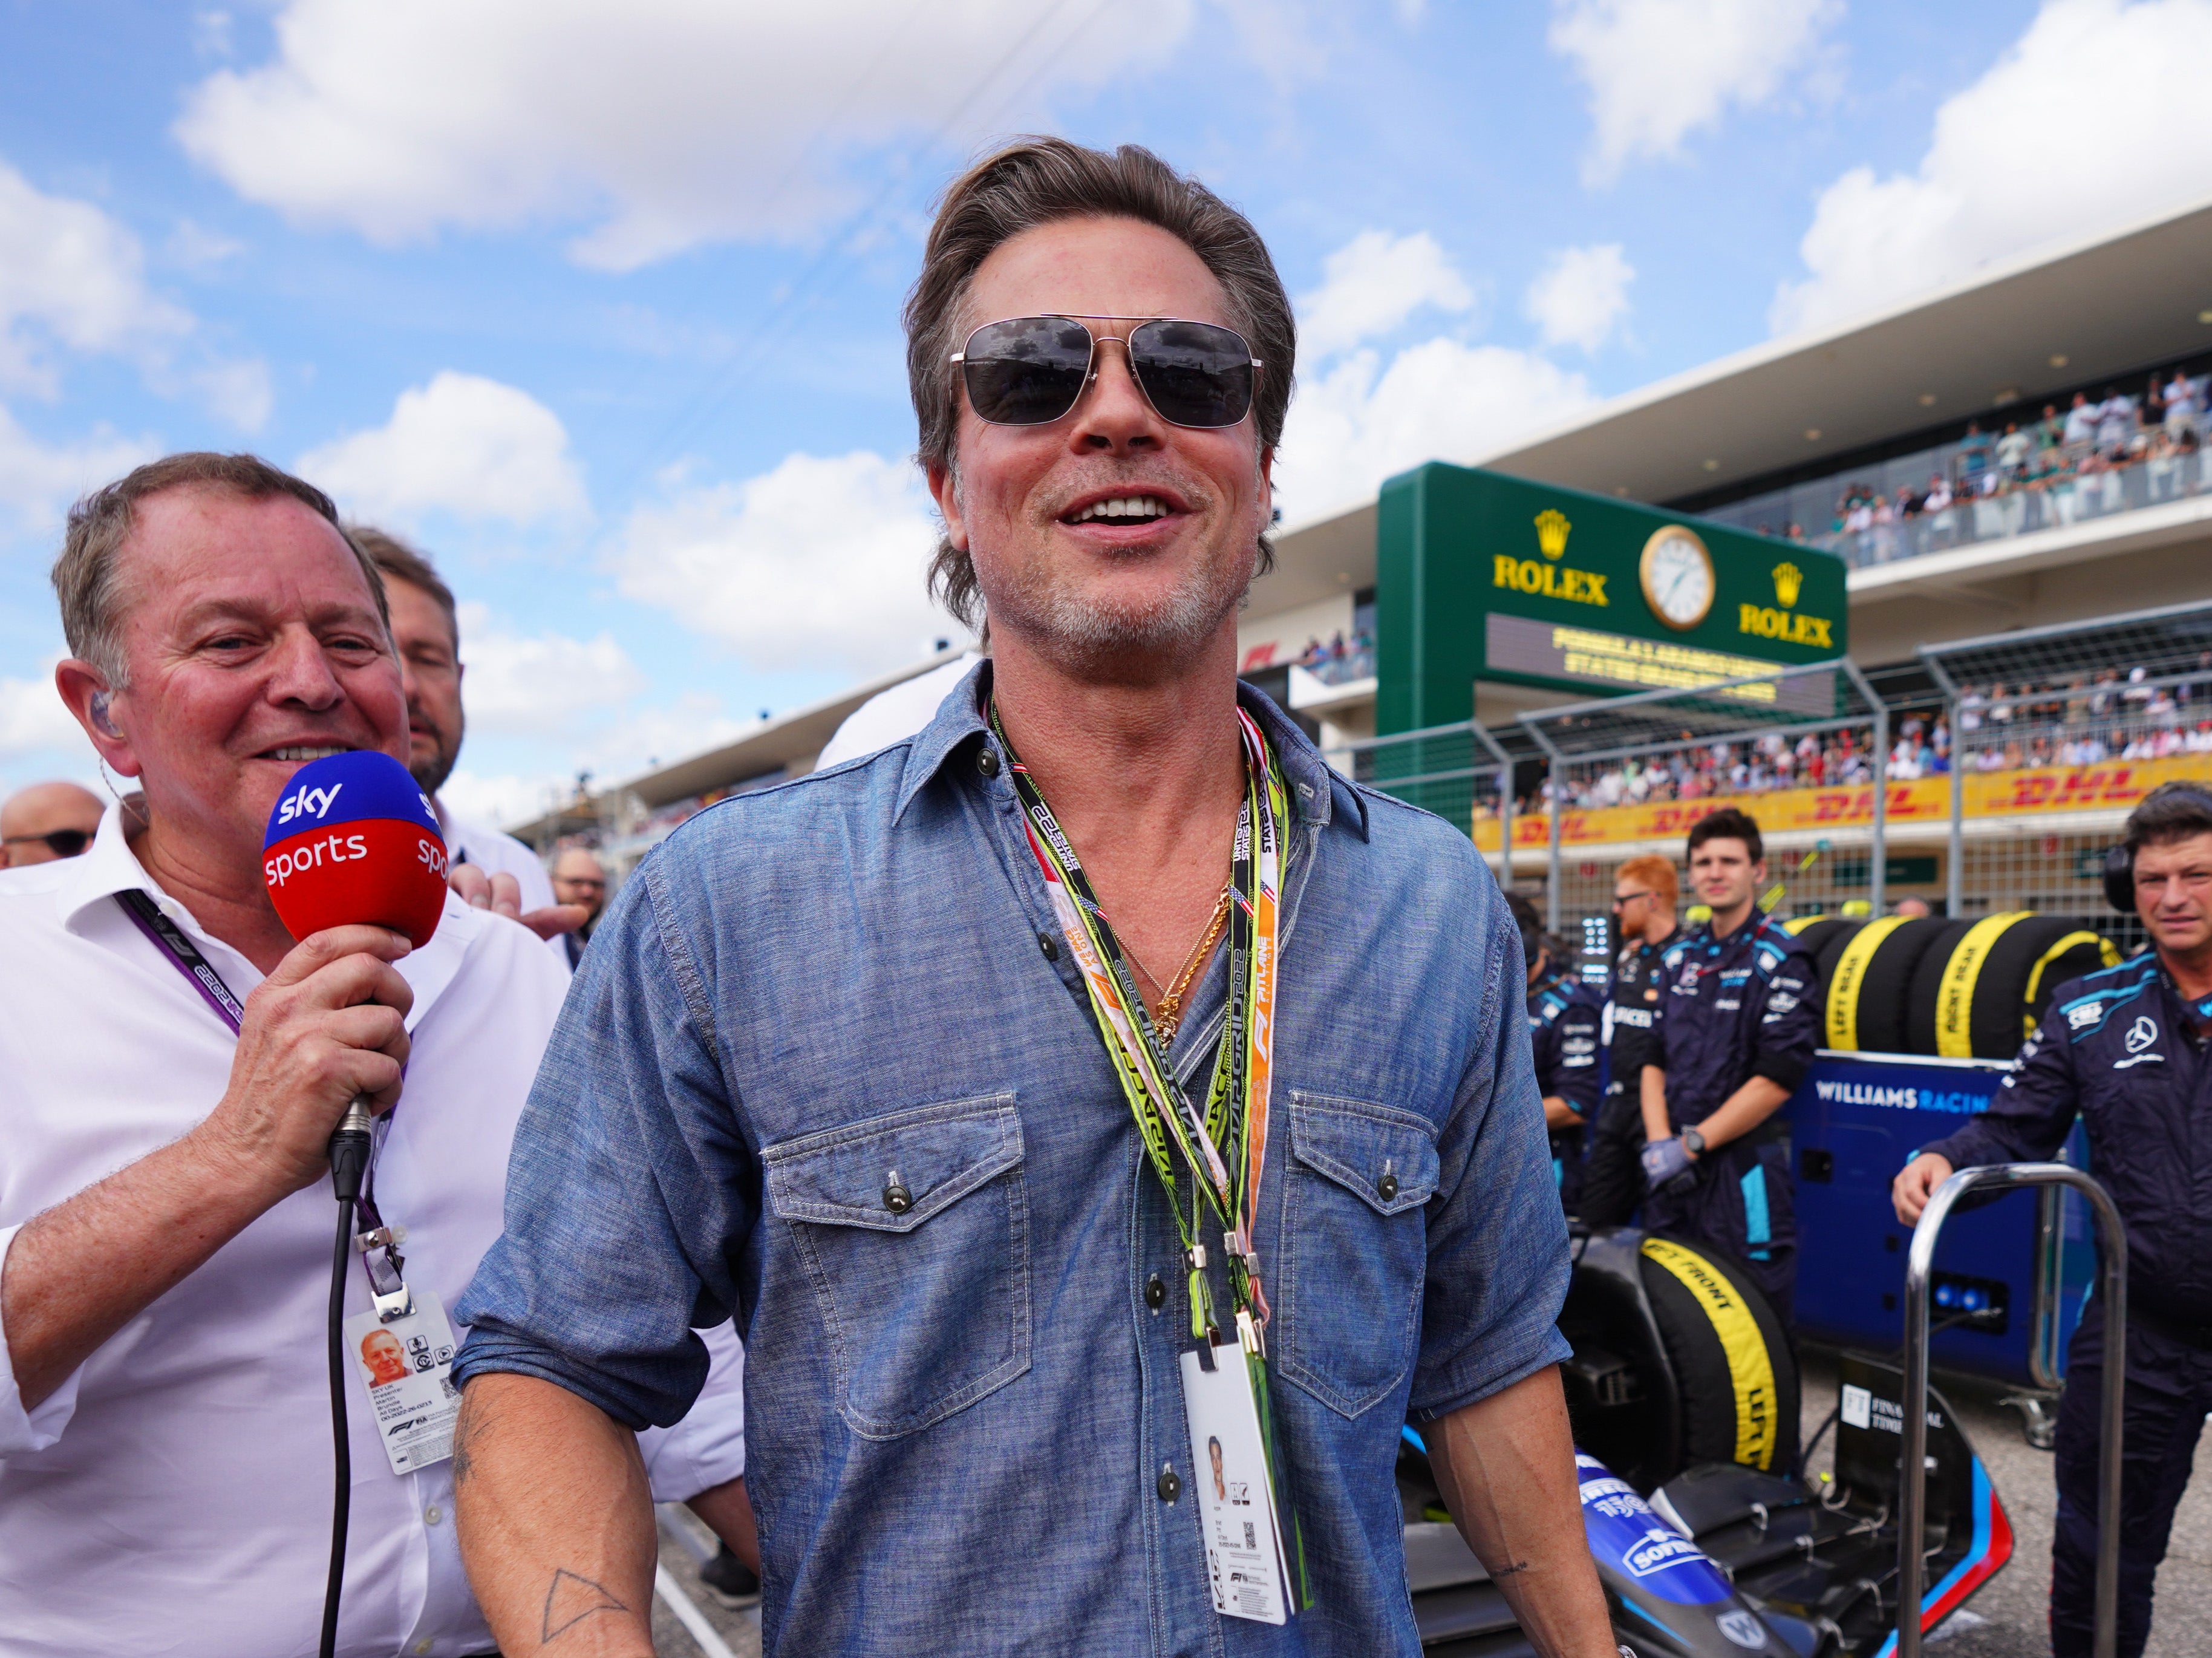 Why is Brad Pitt filming at Silverstone during the British Grand Prix? The Independent